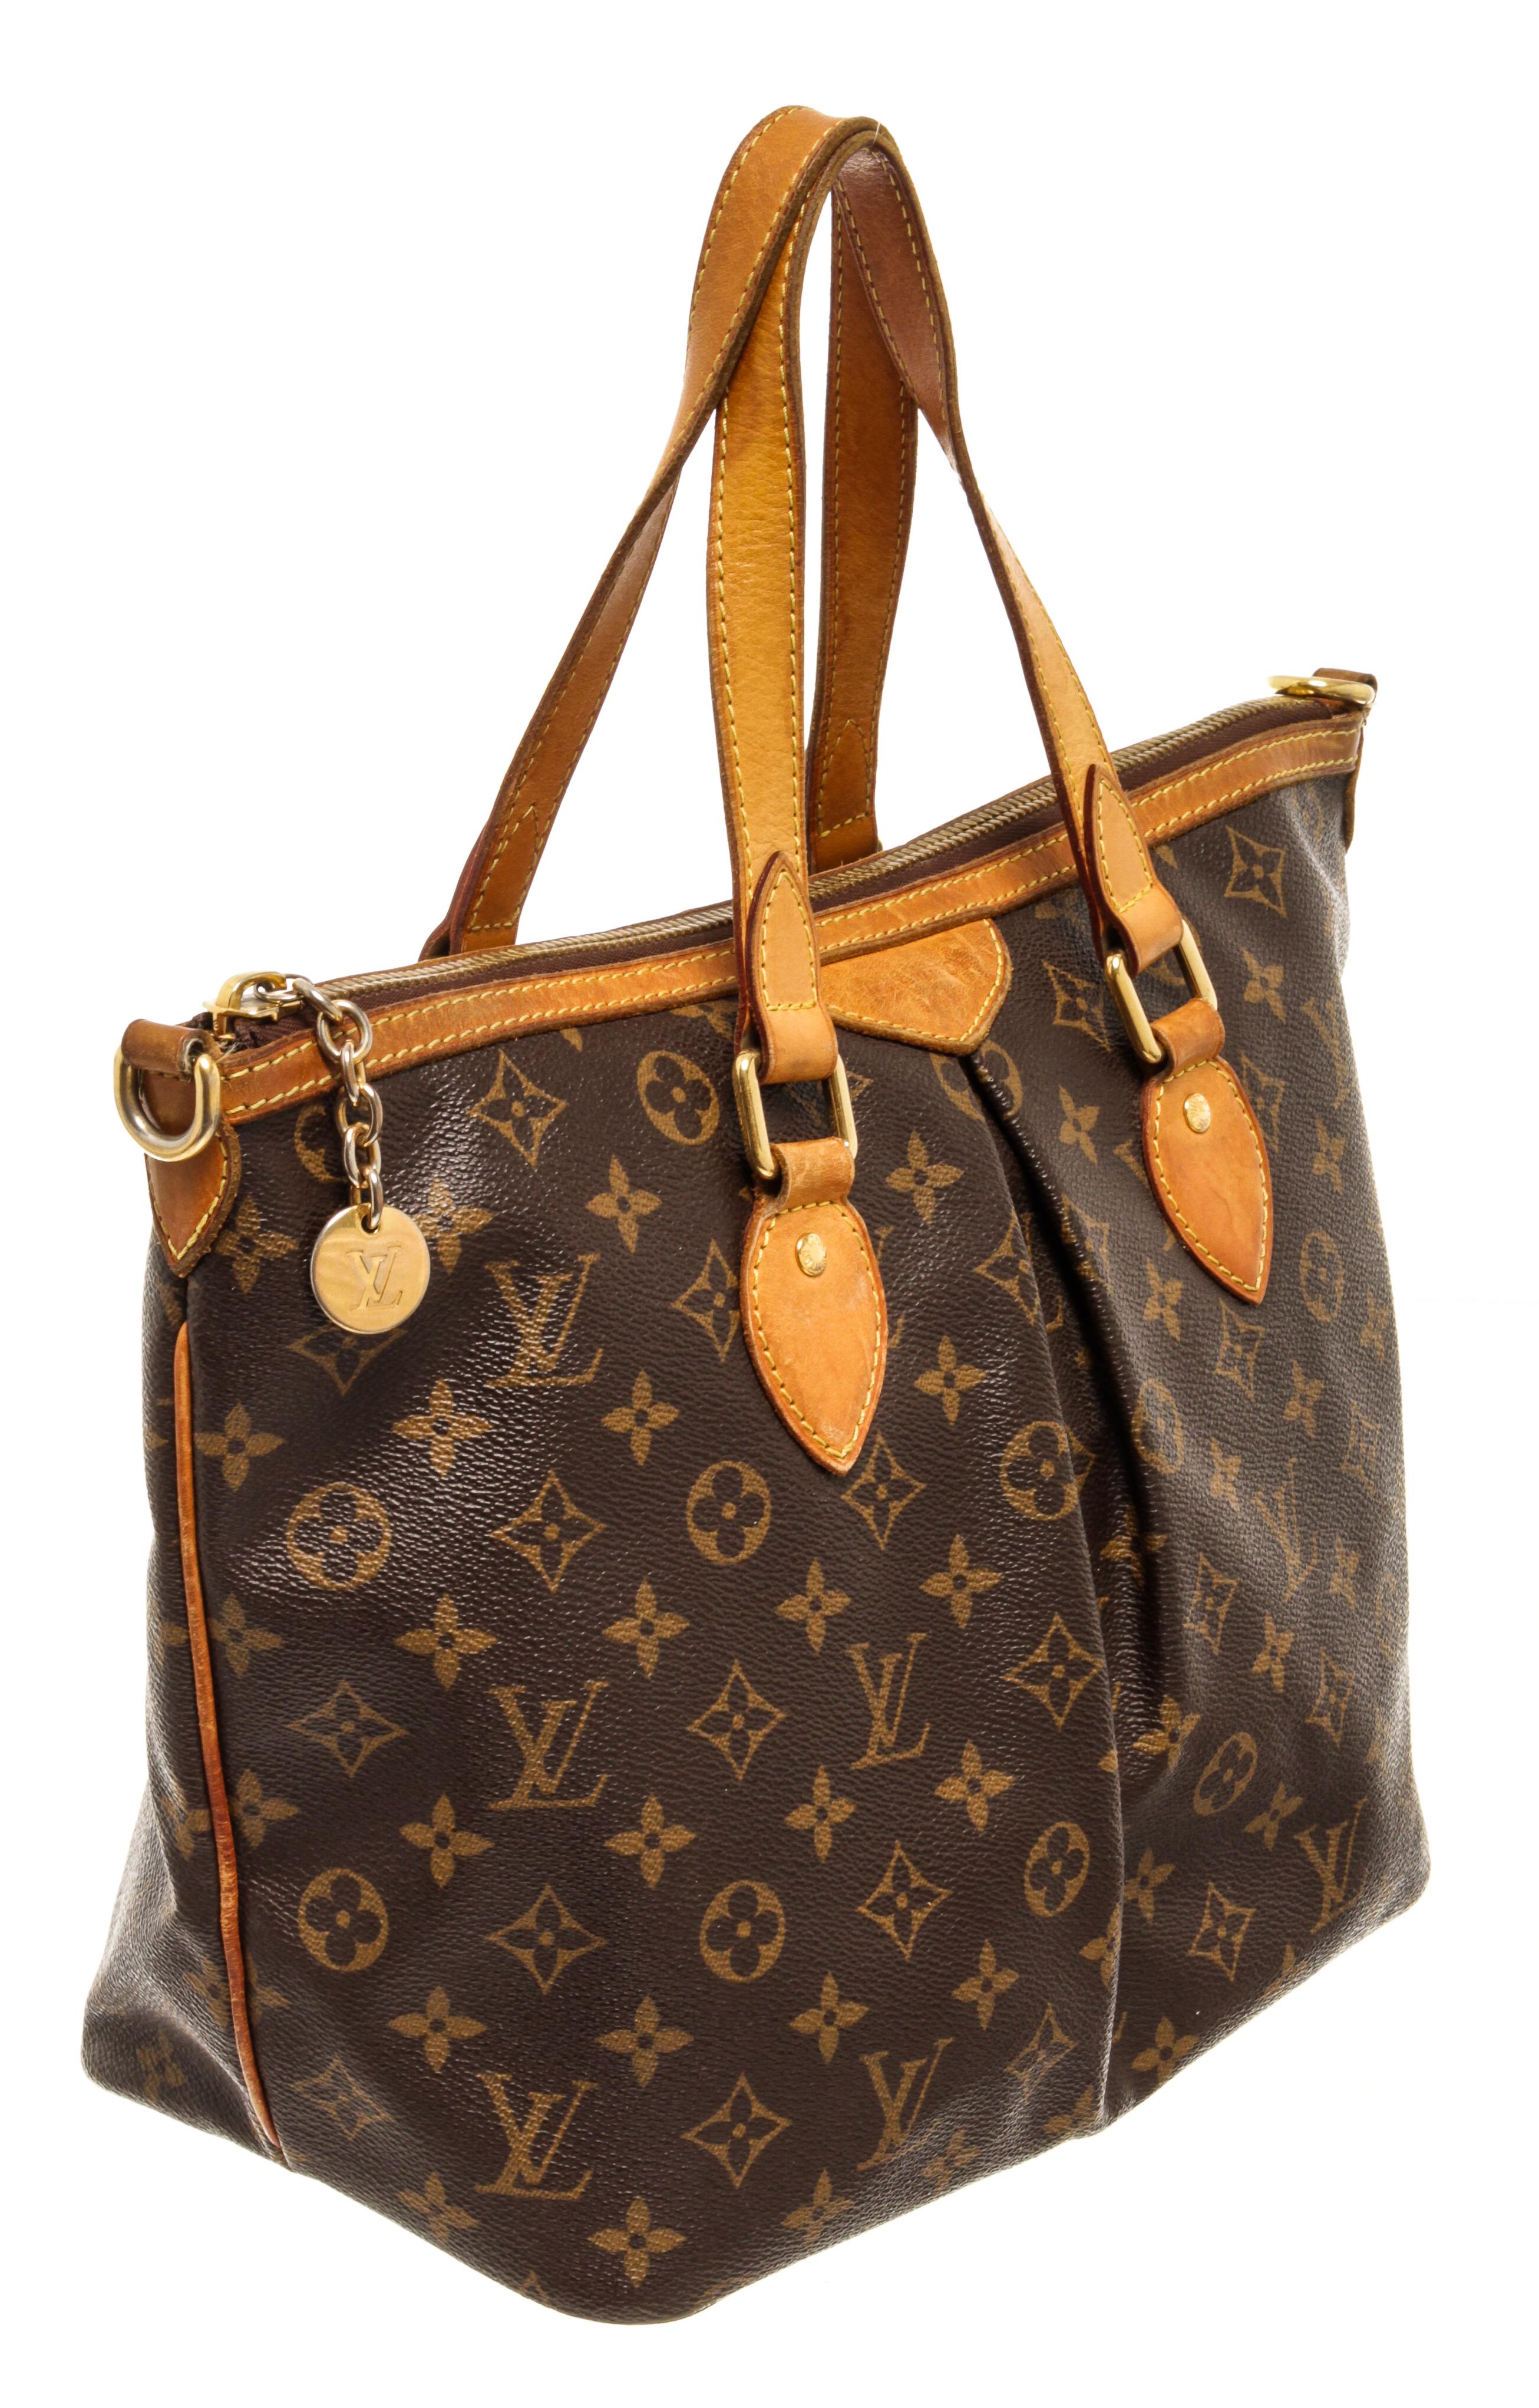 Louis Vuitton Brown Monogram Palermo PM Tote Bag with gold-tone hardware, single shoulder strap, canvas lining & three interior pockets, zip closure at top

74868MSC